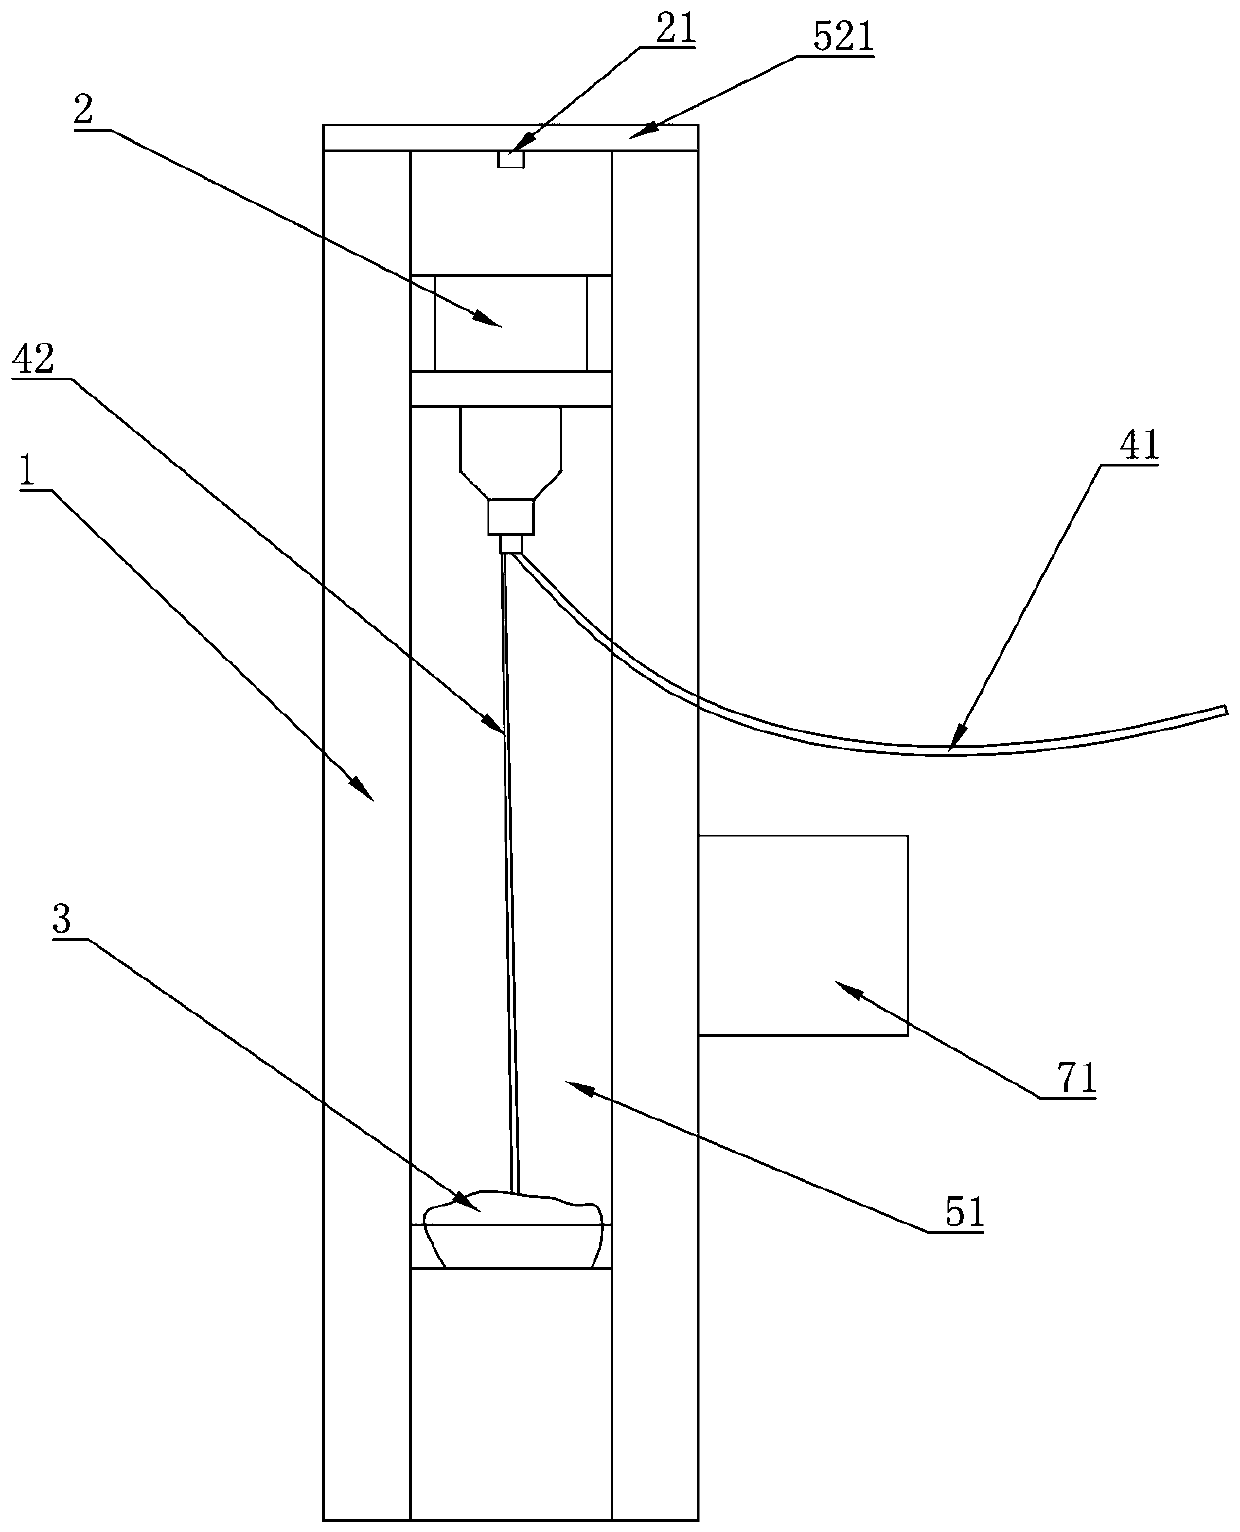 Pressure monitoring and adjusting device for external drainage system